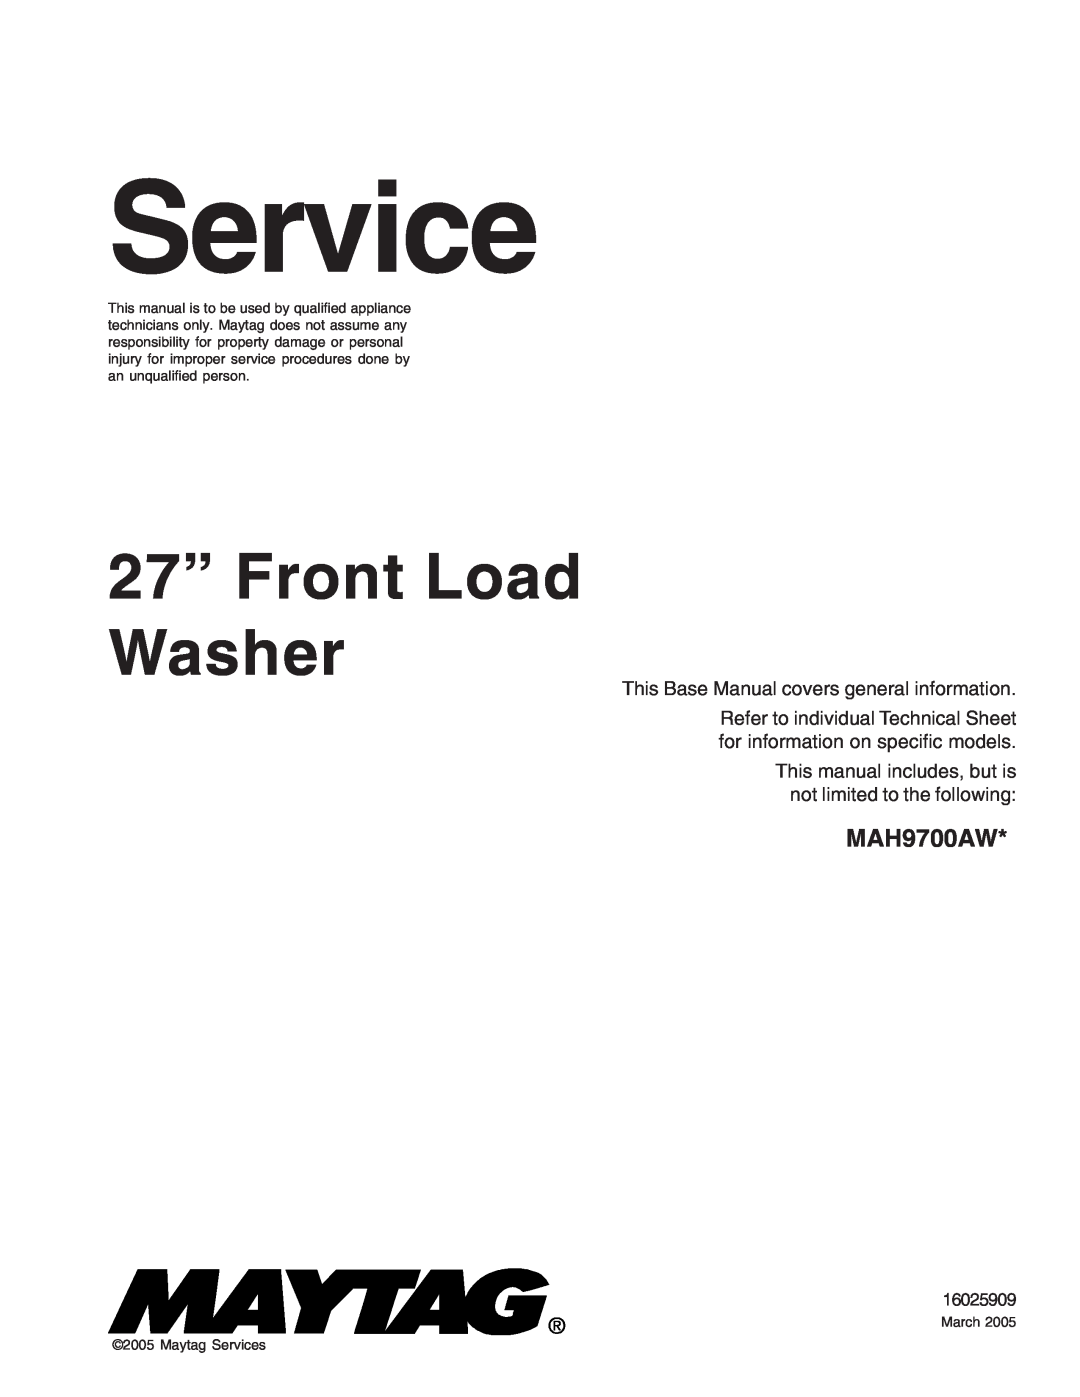 Whirlpool MAH9700AW manual Service, 27” Front Load Washer, This Base Manual covers general information, 16025909 